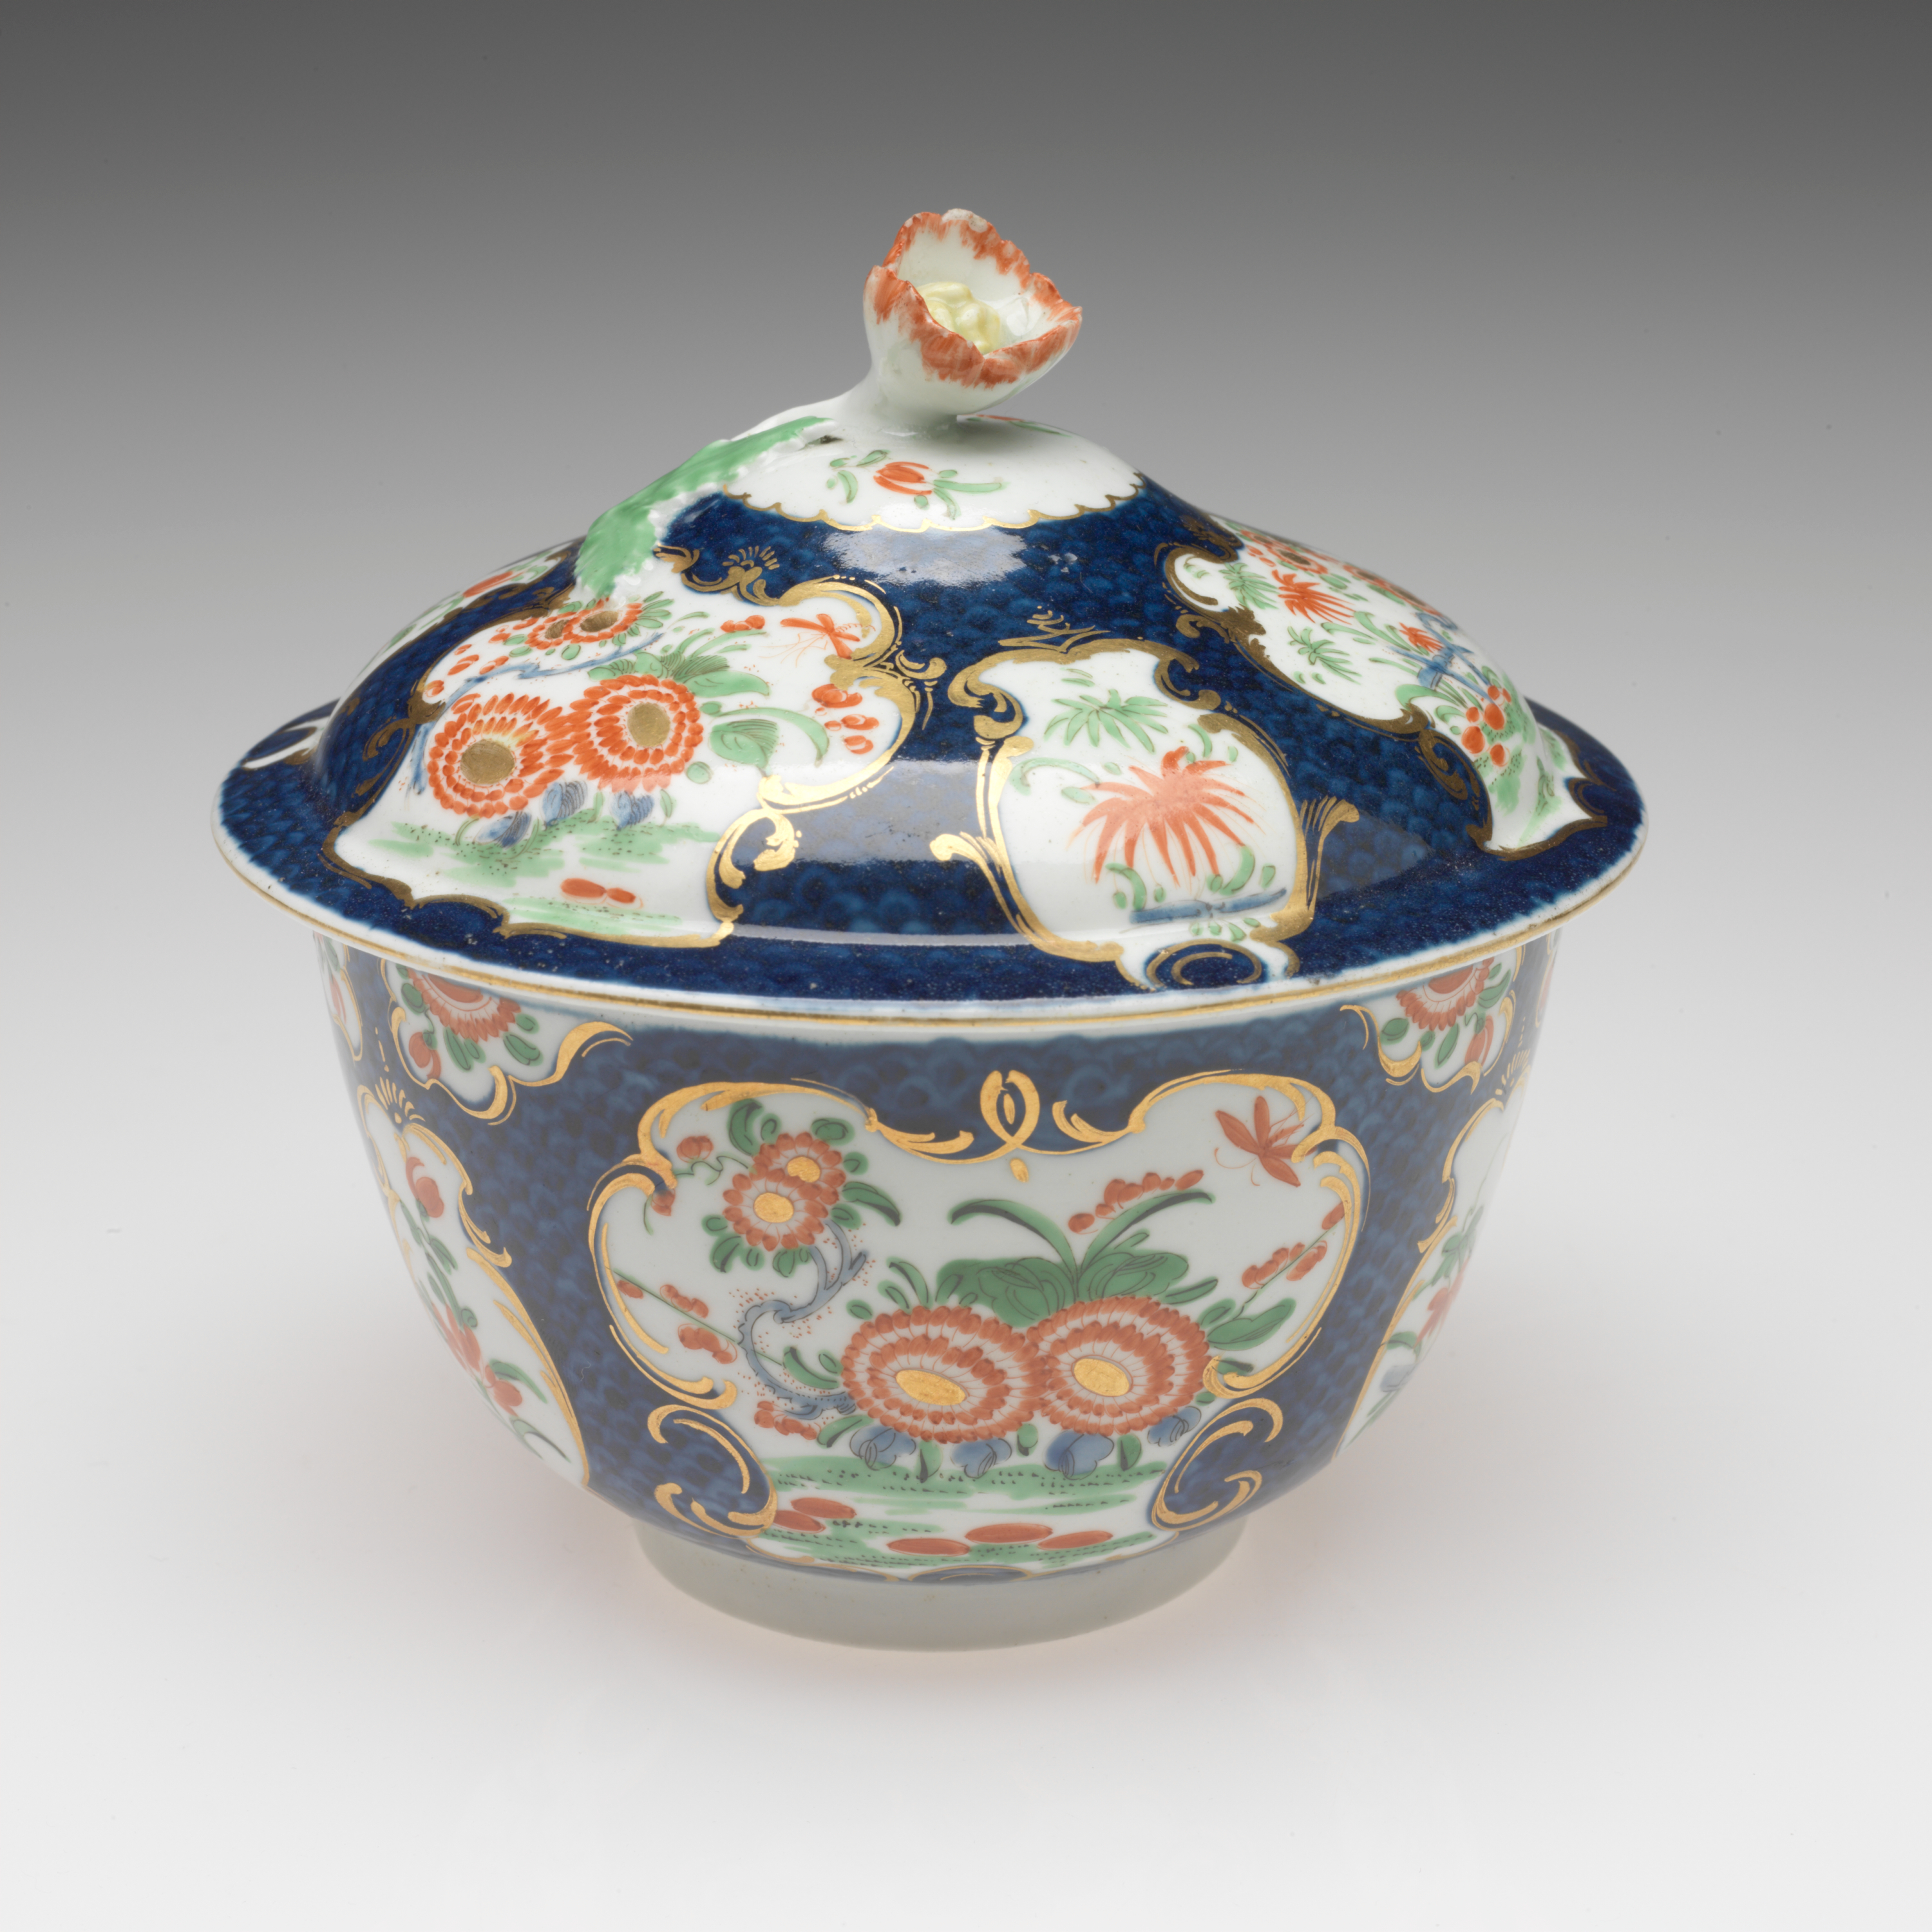 /A%20lidded%20sugar%20bowl%20with%20floral%20decorations%20in%20gilded%20vignettes%2C%20surrounded%20by%20dark%20blue%20glaze%2C%20the%20finial%20on%20the%20lid%20is%20a%20sculptural%20red%2C%20white%2C%20and%20yellow%20flower.%20